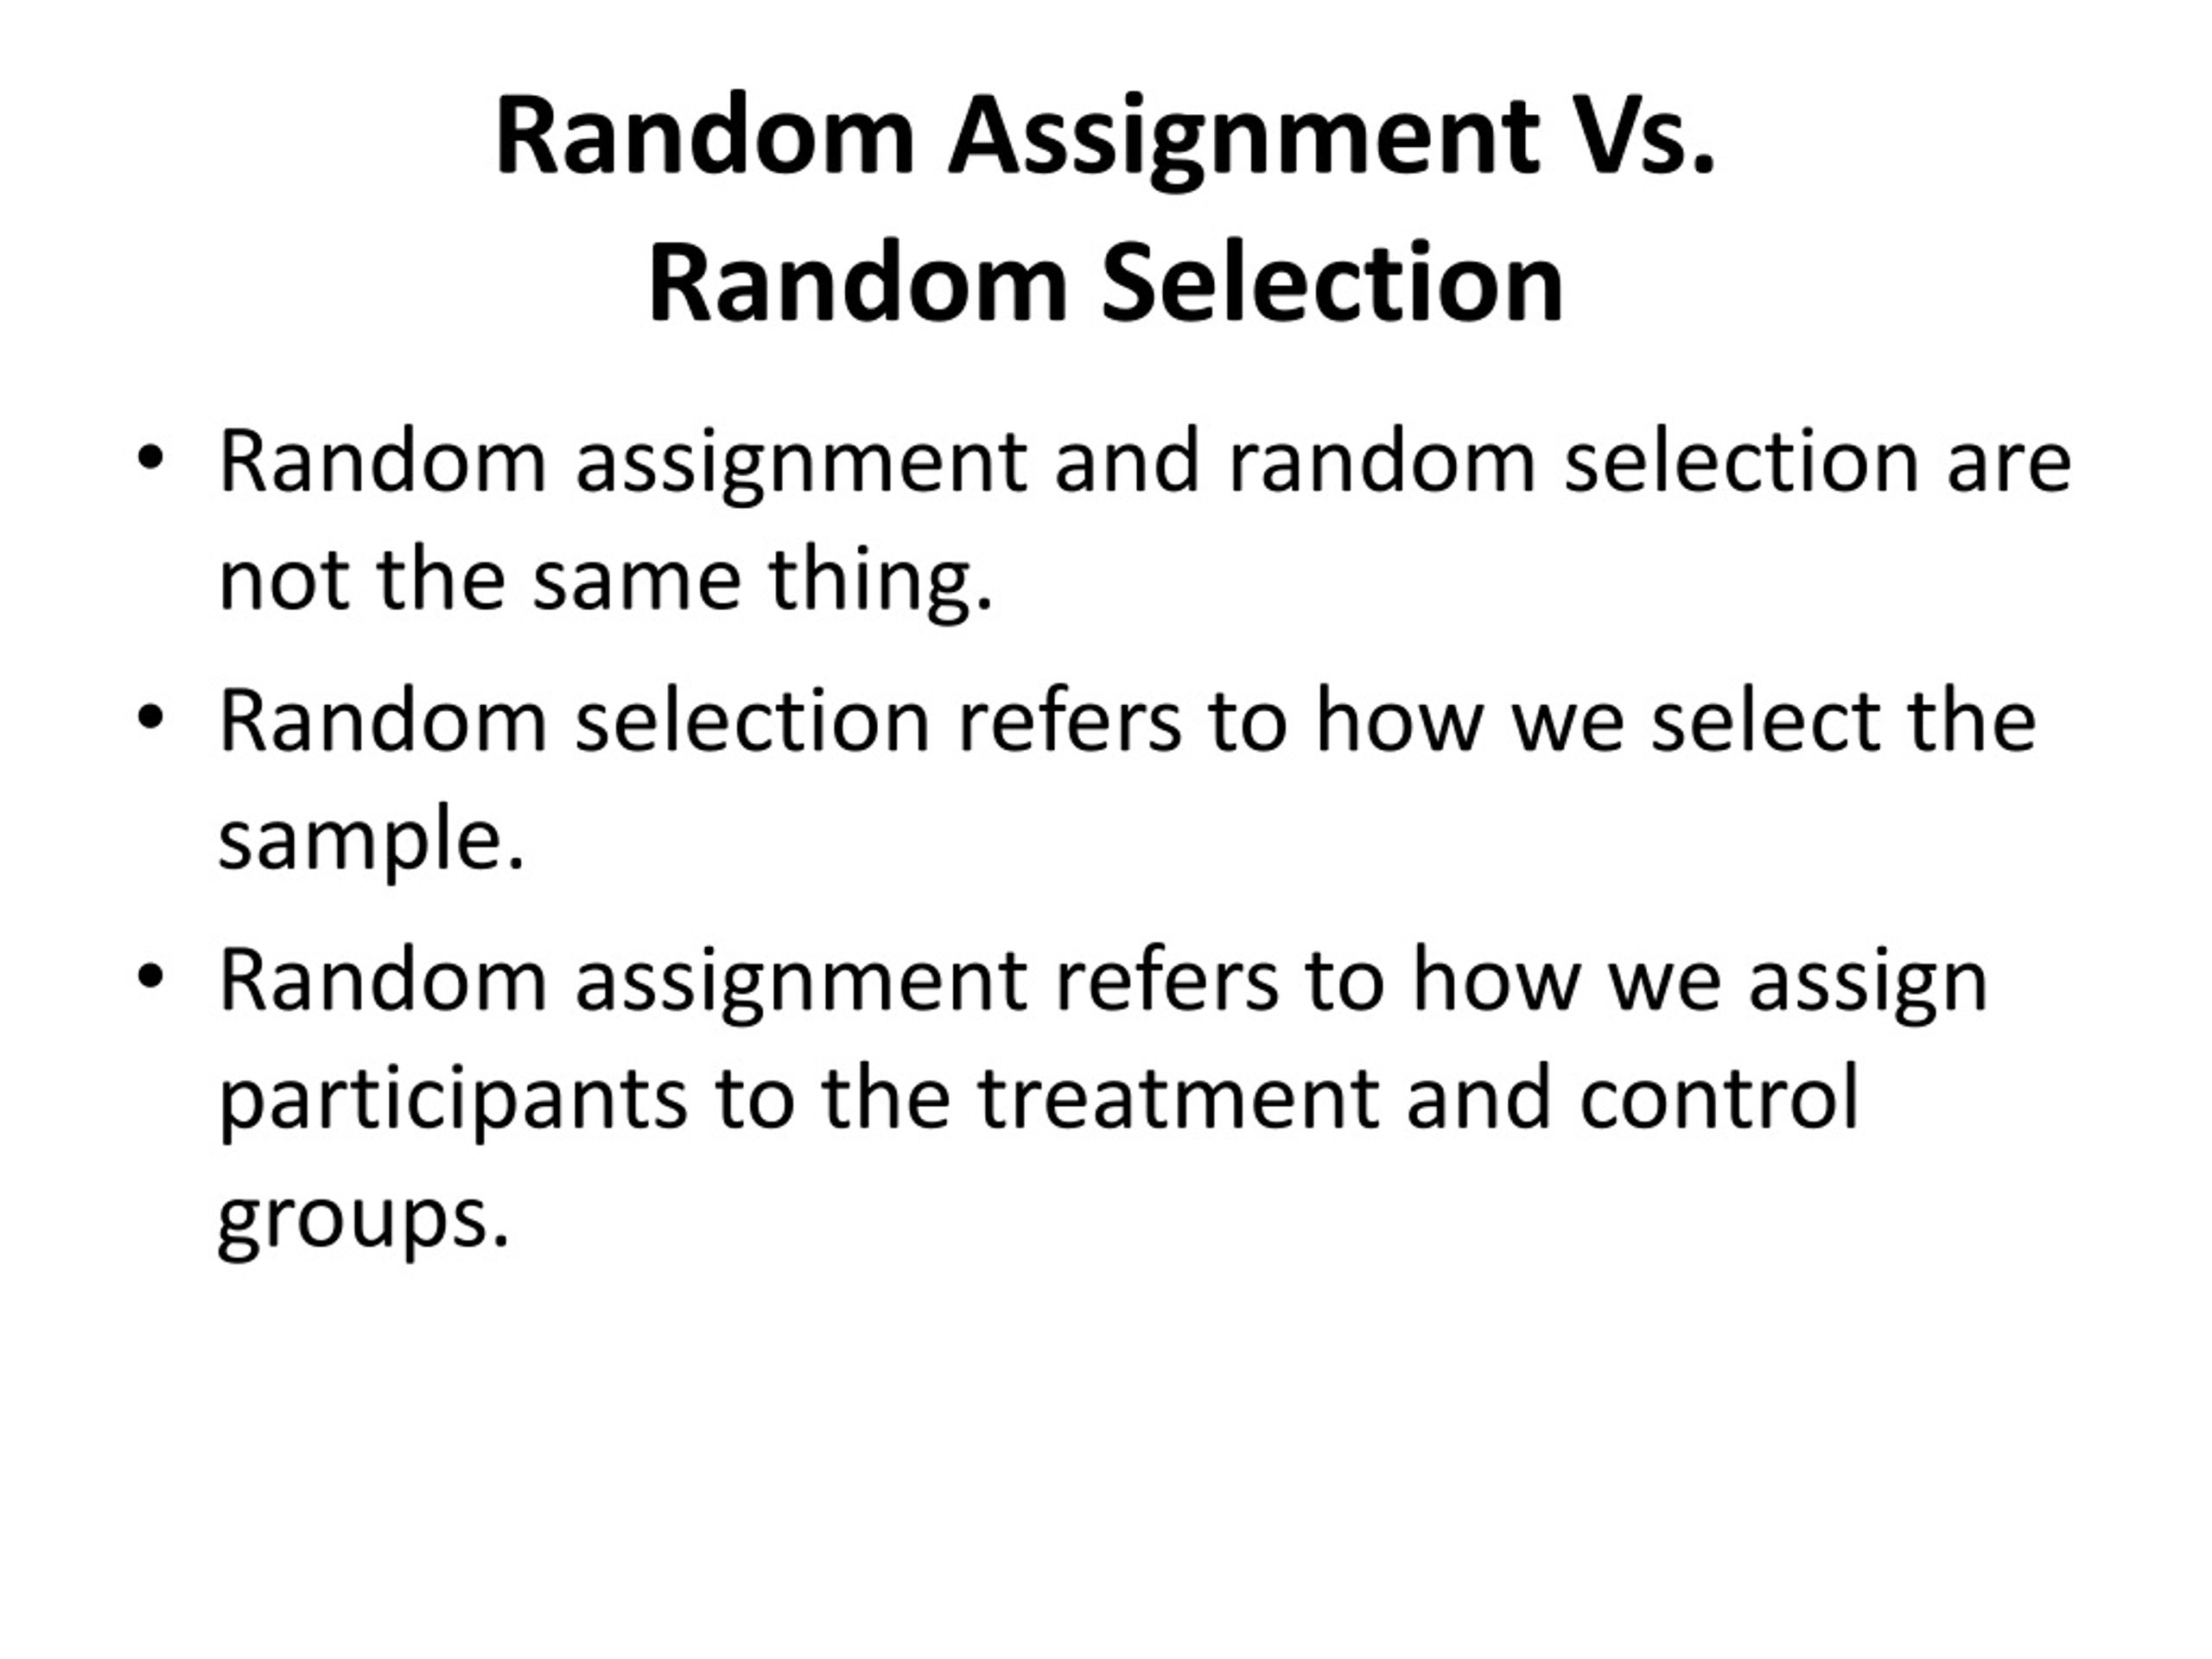 an advantage of random assignment is that it